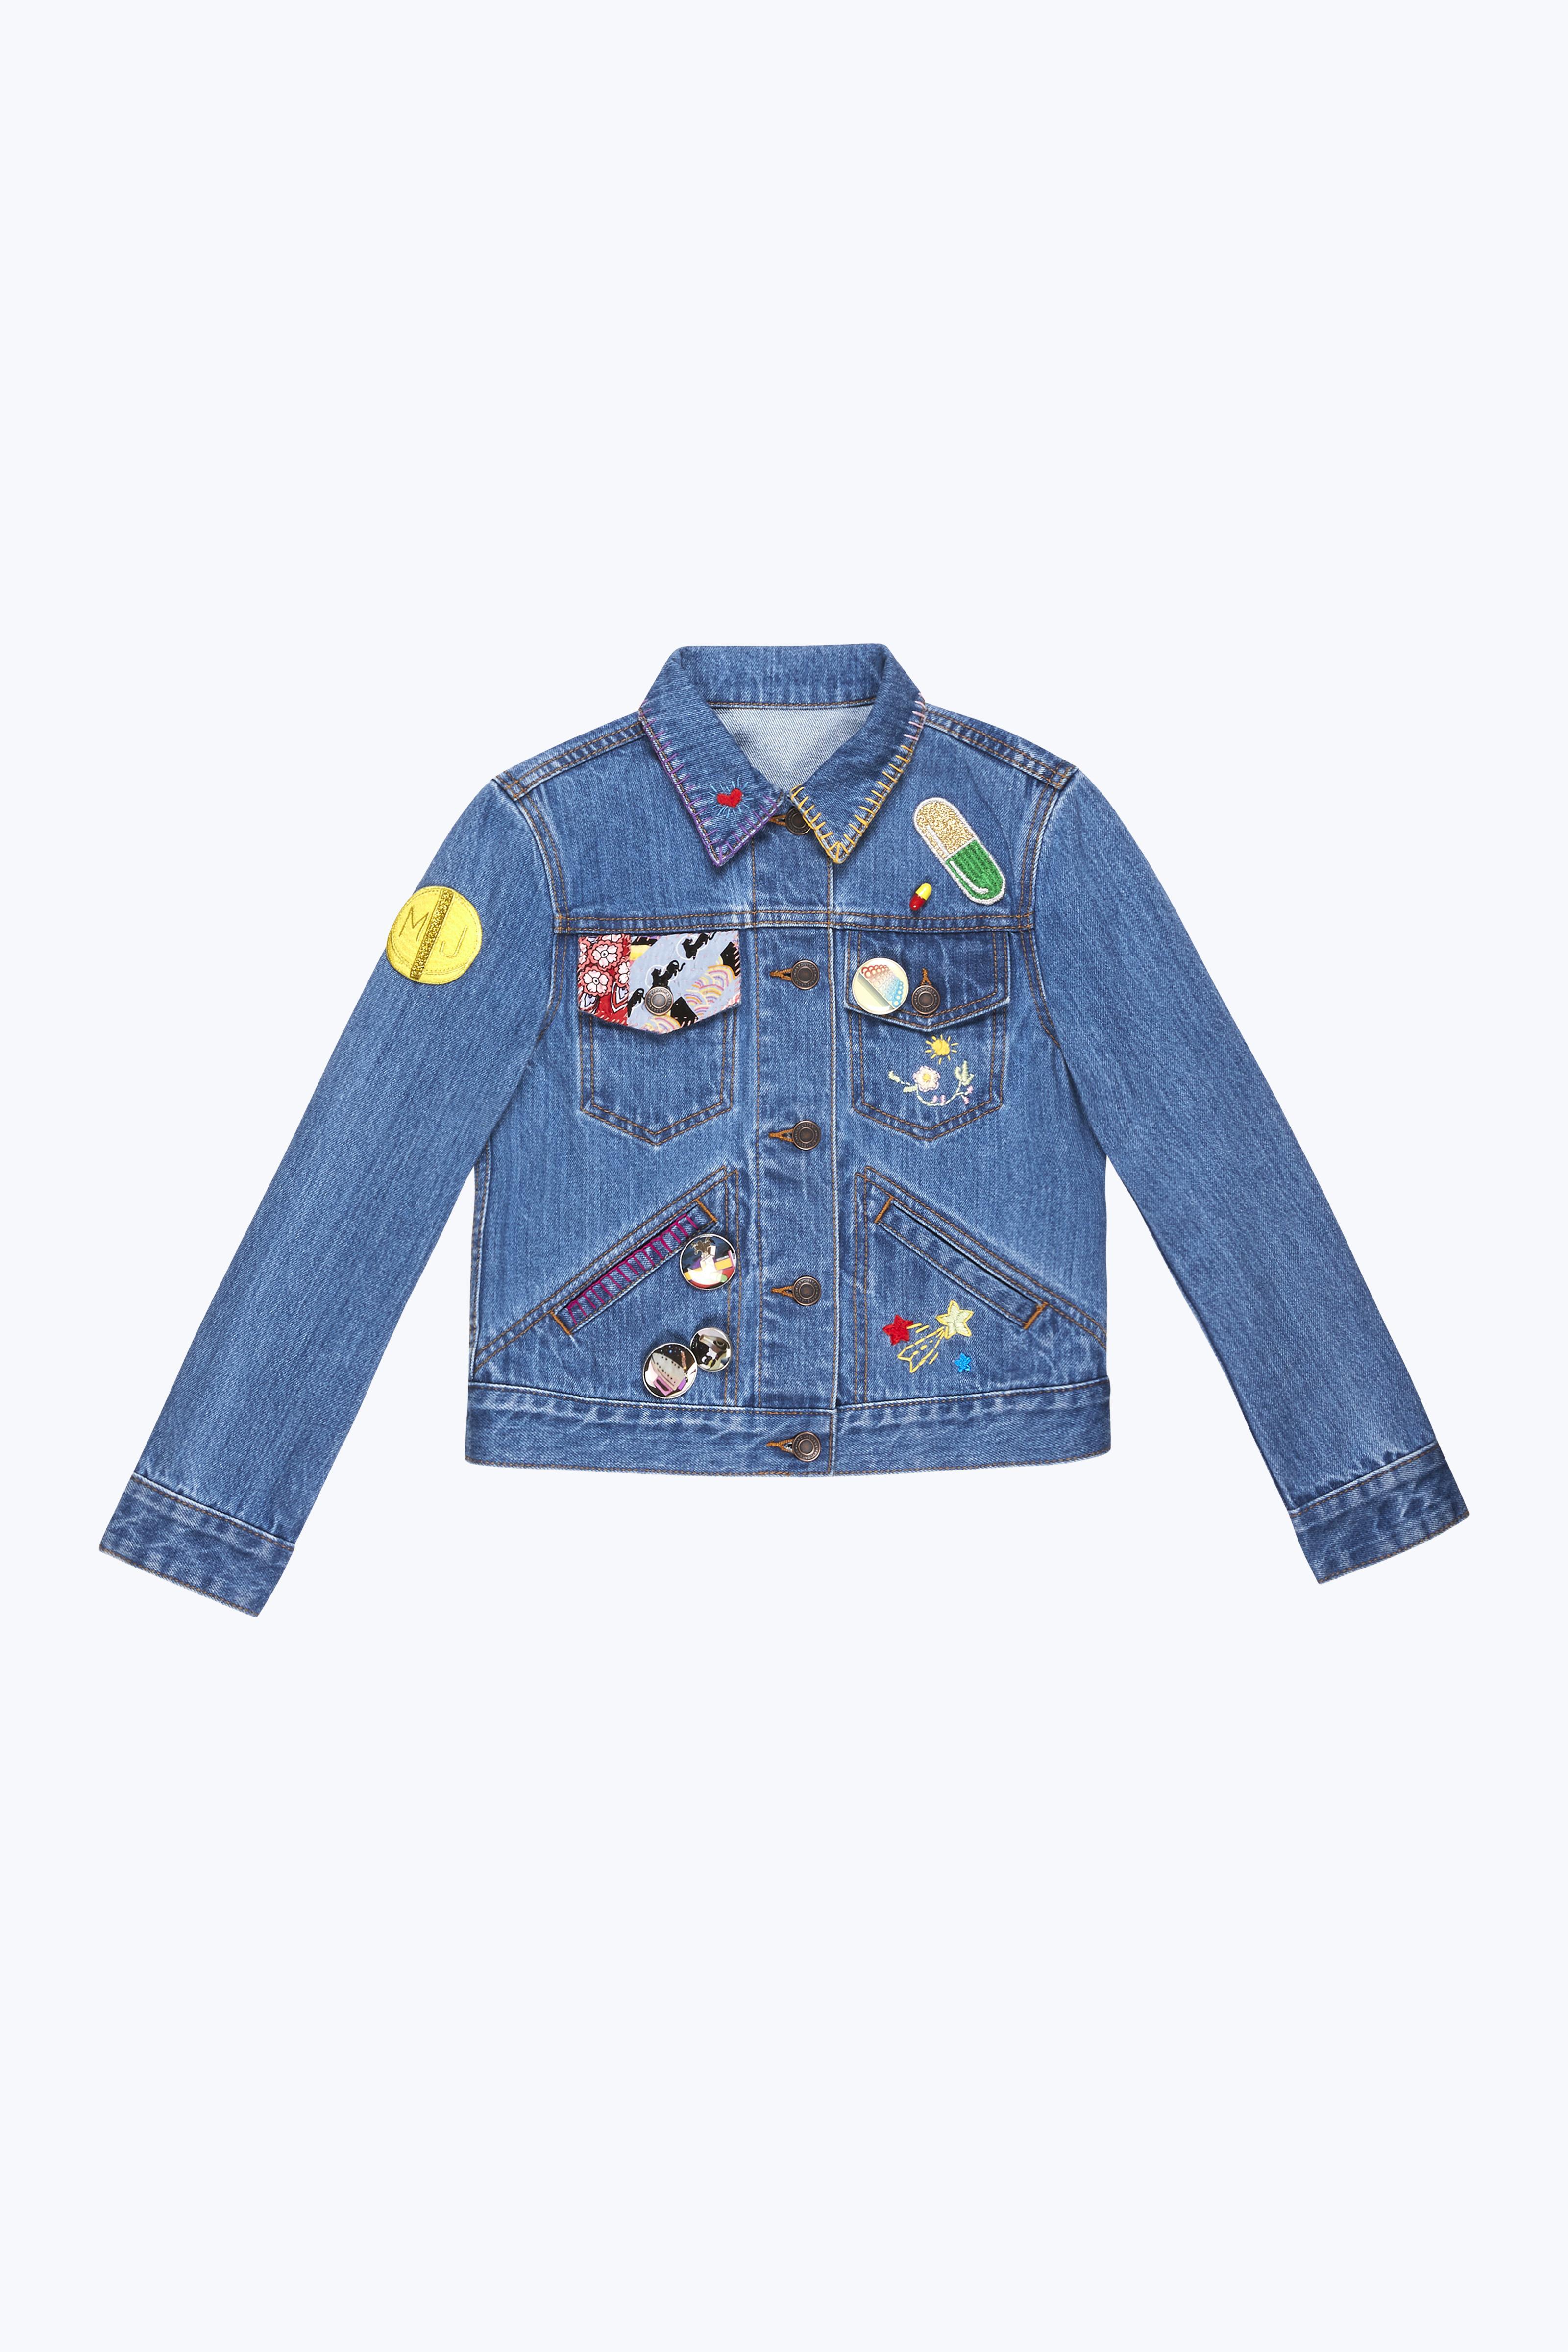 Lyst - Marc Jacobs Shrunken Denim Jacket With Embroidery in Blue